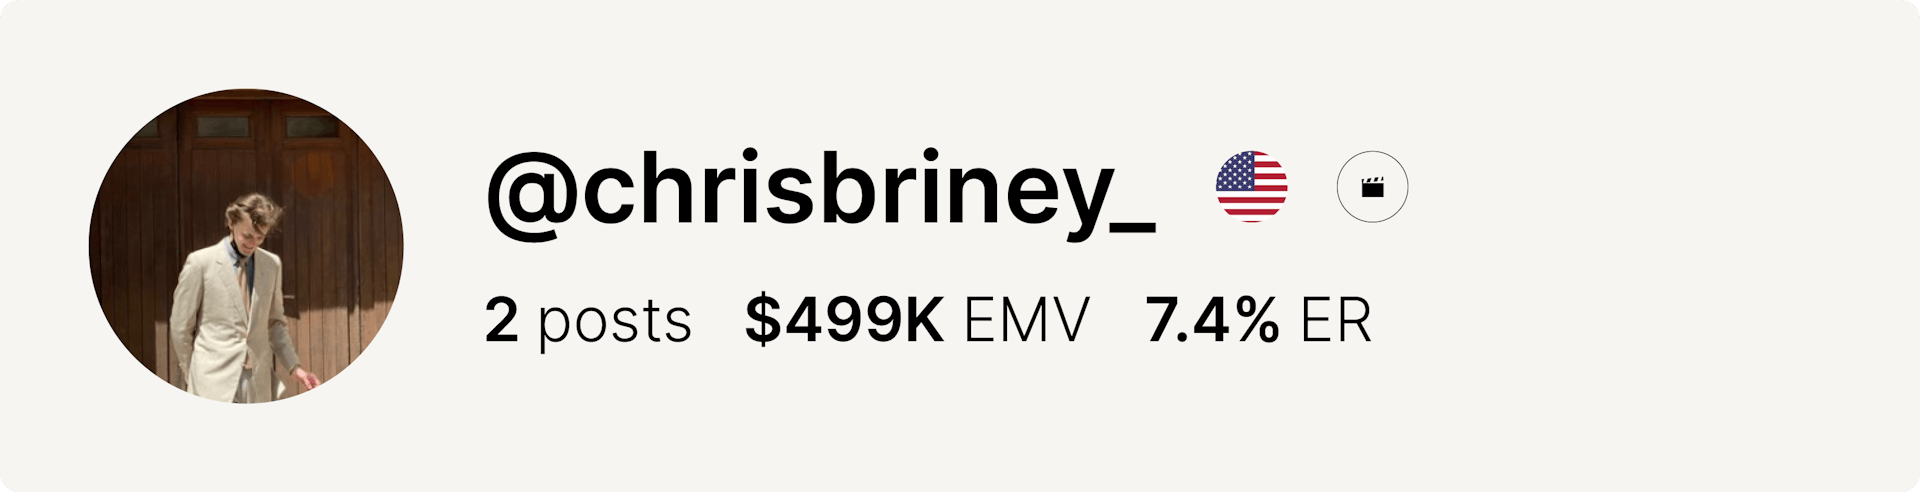 An image of Chris Briney's Instagram account and data from the fashion week.